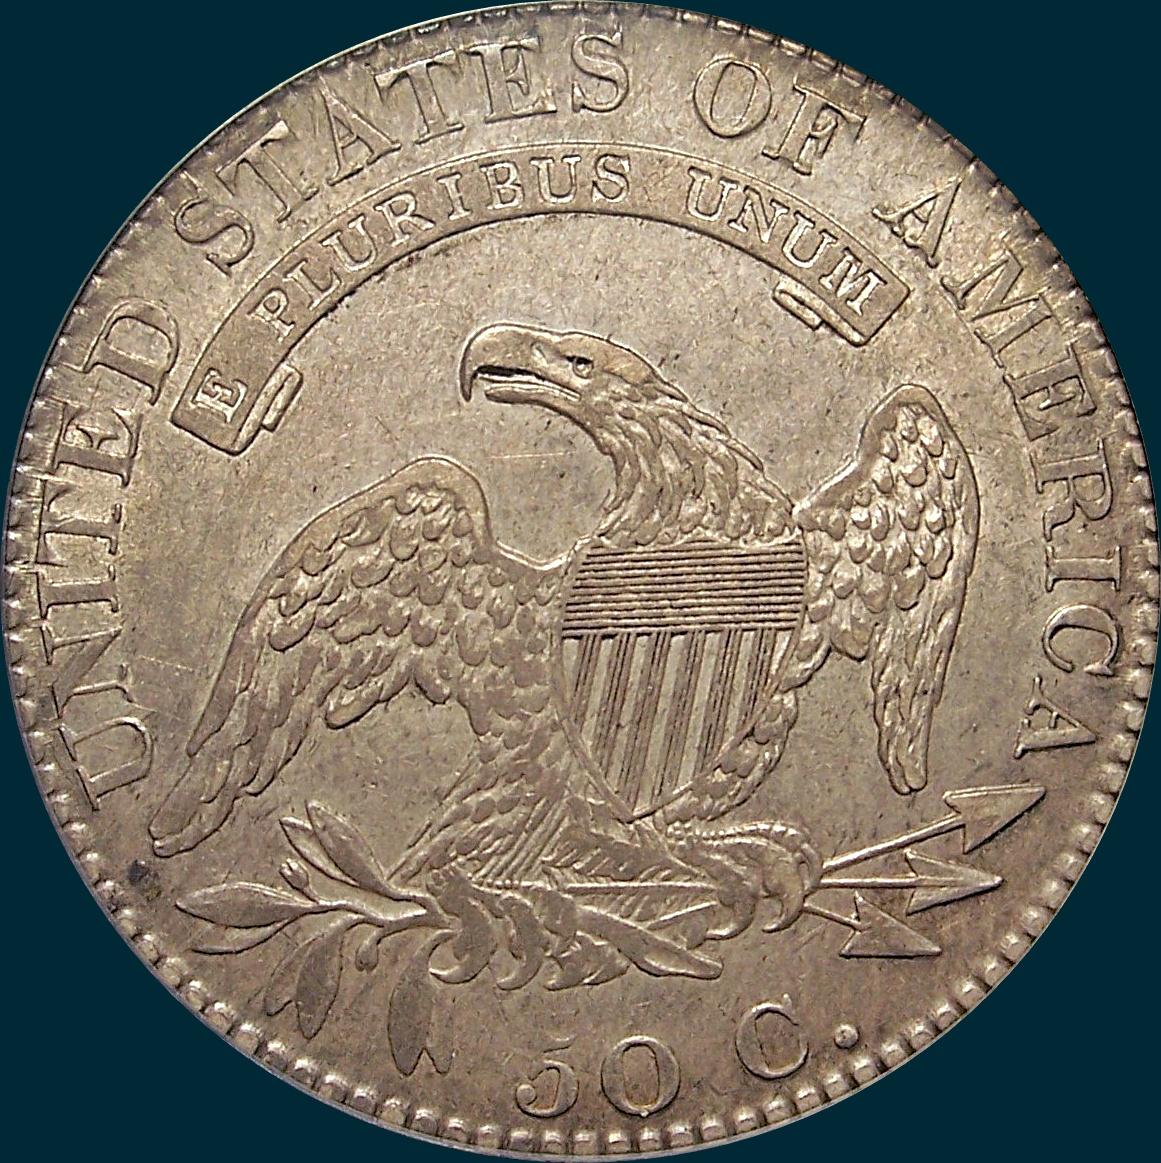 1820, O-103, Small Date, Curled 2, Capped Bust Half Dollar